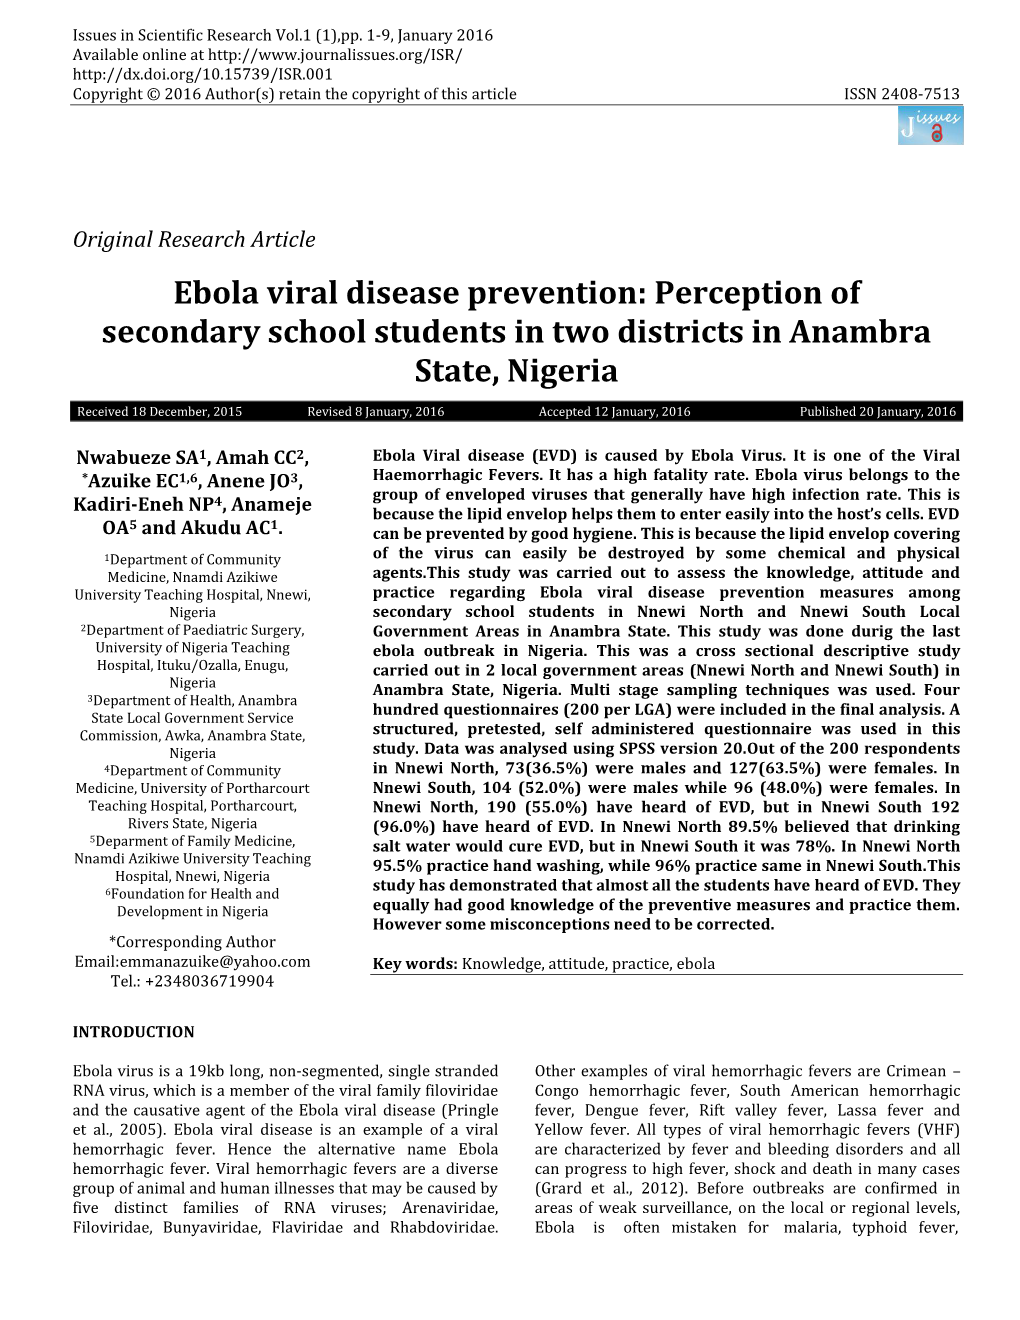 Perception of Secondary School Students in Two Districts in Anambra State, Nigeria